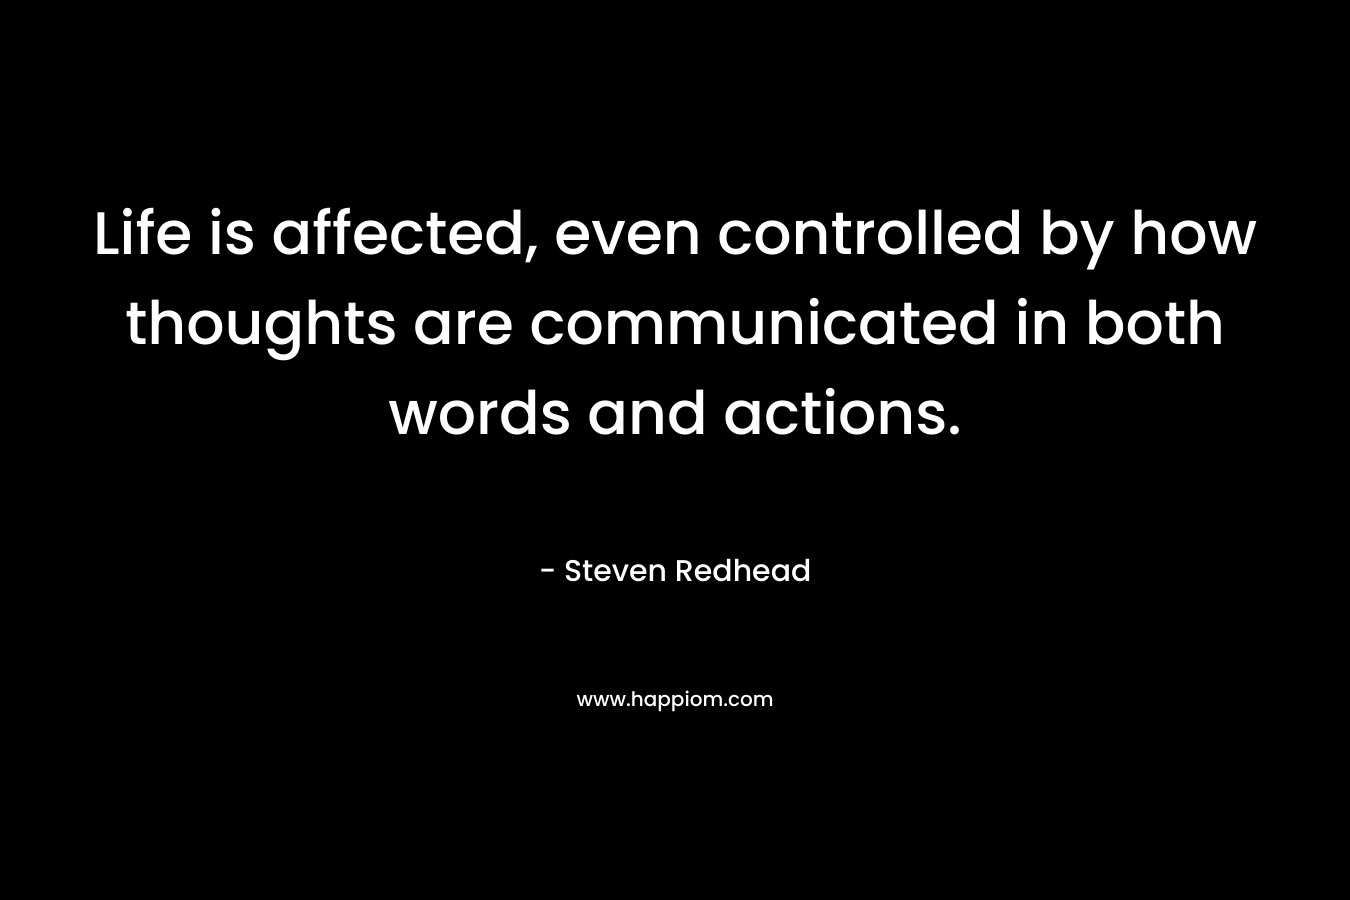 Life is affected, even controlled by how thoughts are communicated in both words and actions. – Steven Redhead